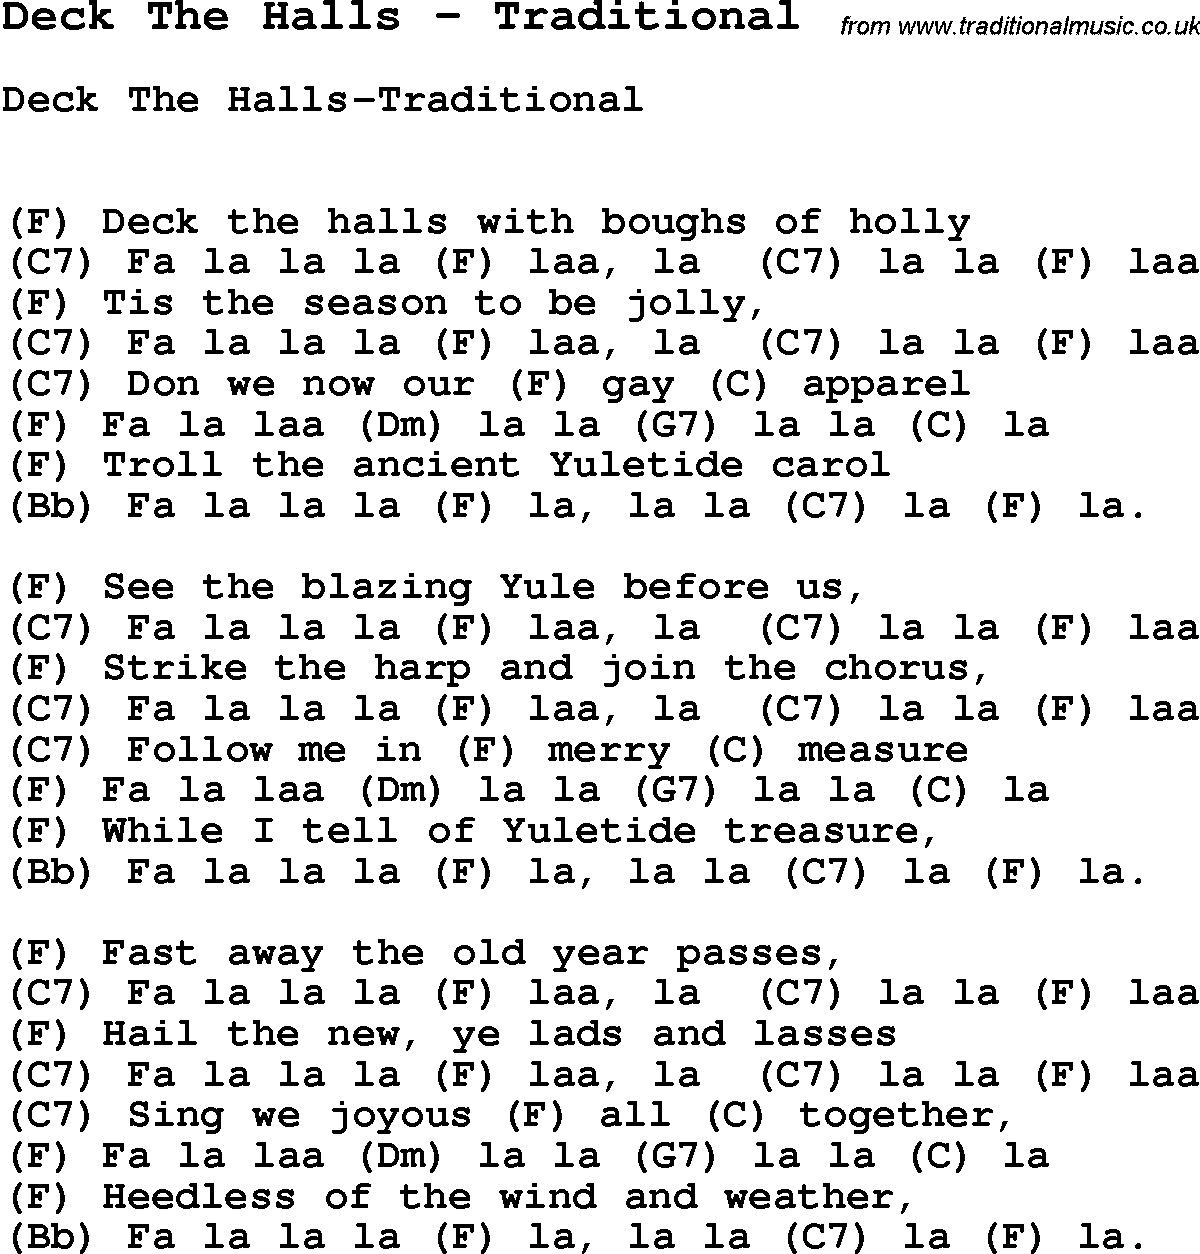 Song Deck The Halls by Traditional, with lyrics for vocal performance and accompaniment chords for Ukulele, Guitar Banjo etc.